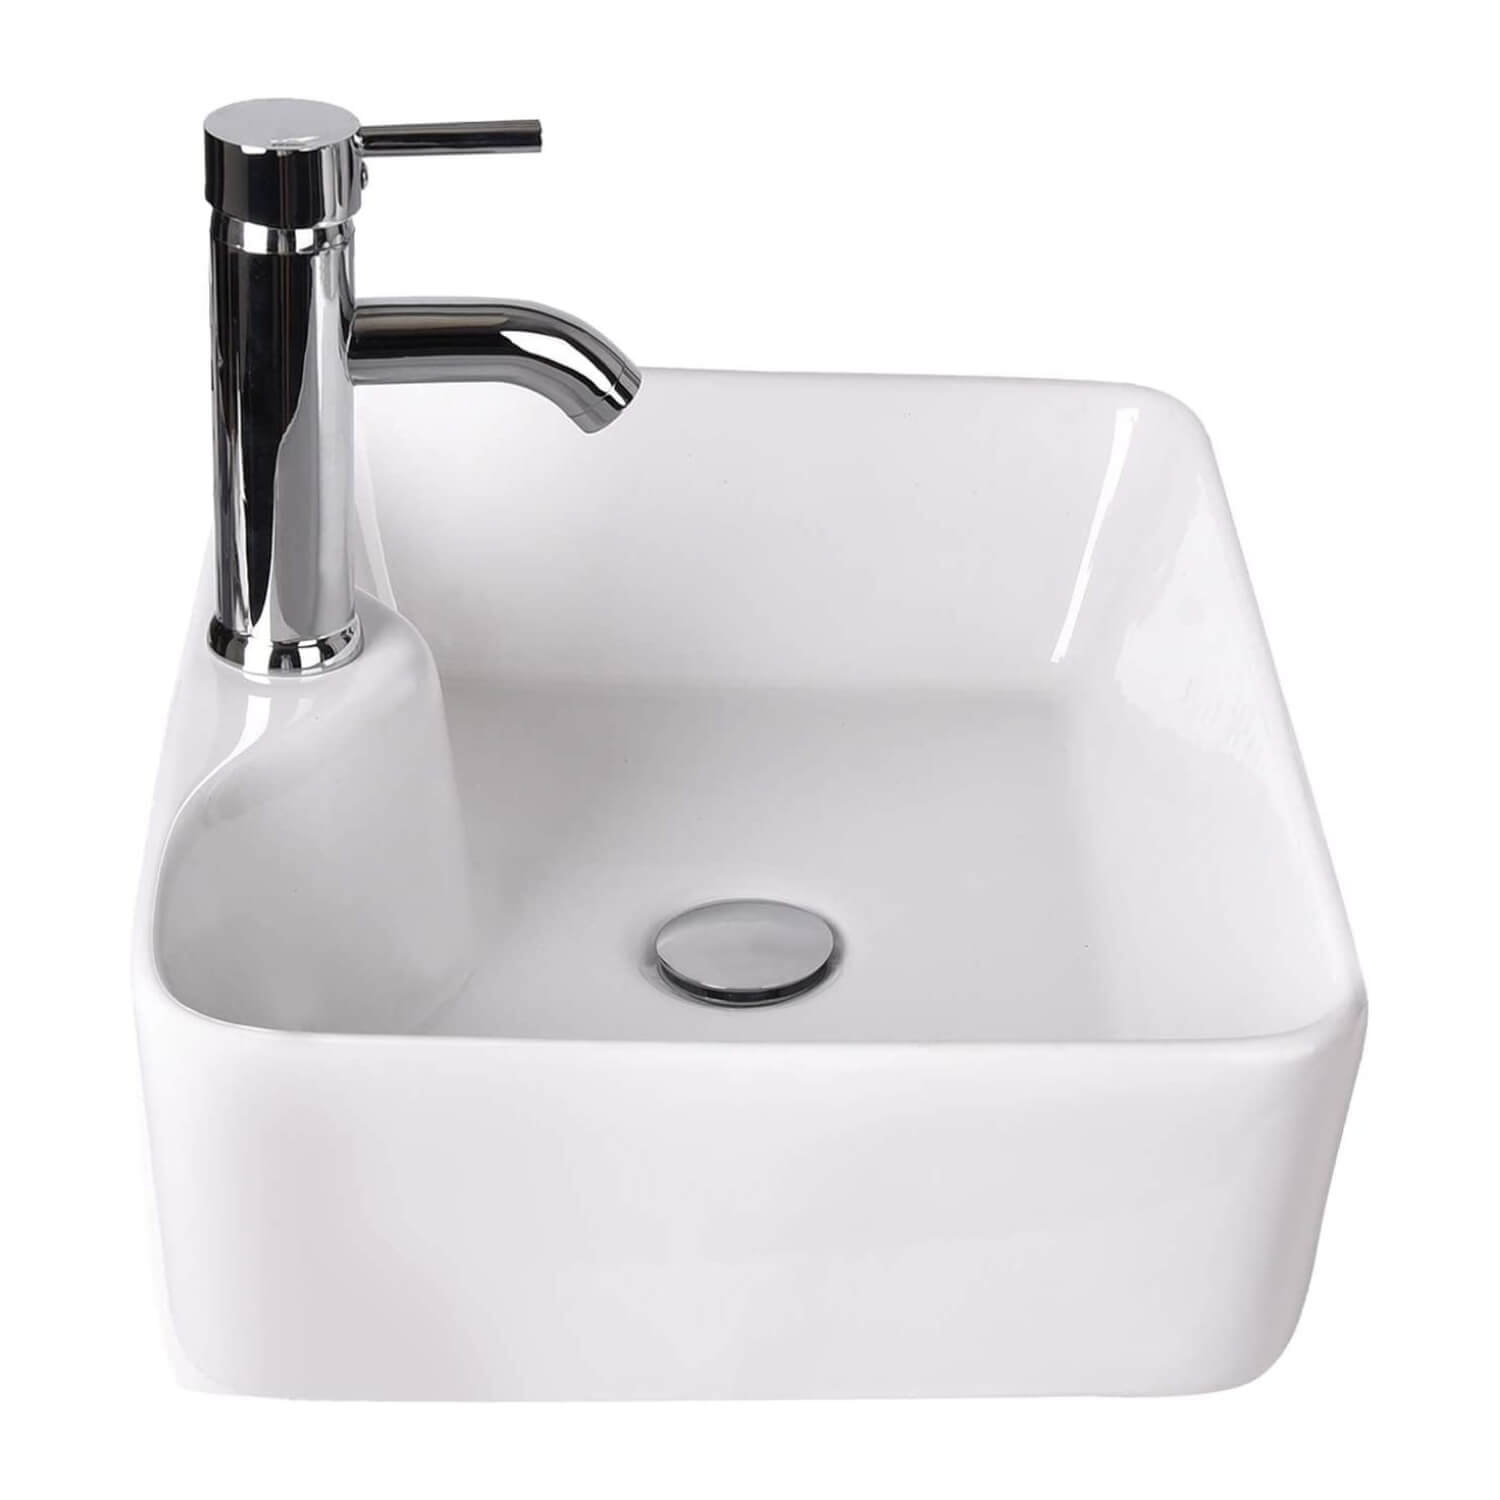 Rectangle Ceramic Bathroom Vessel Sink with Pop Up Drain HW1097 side view